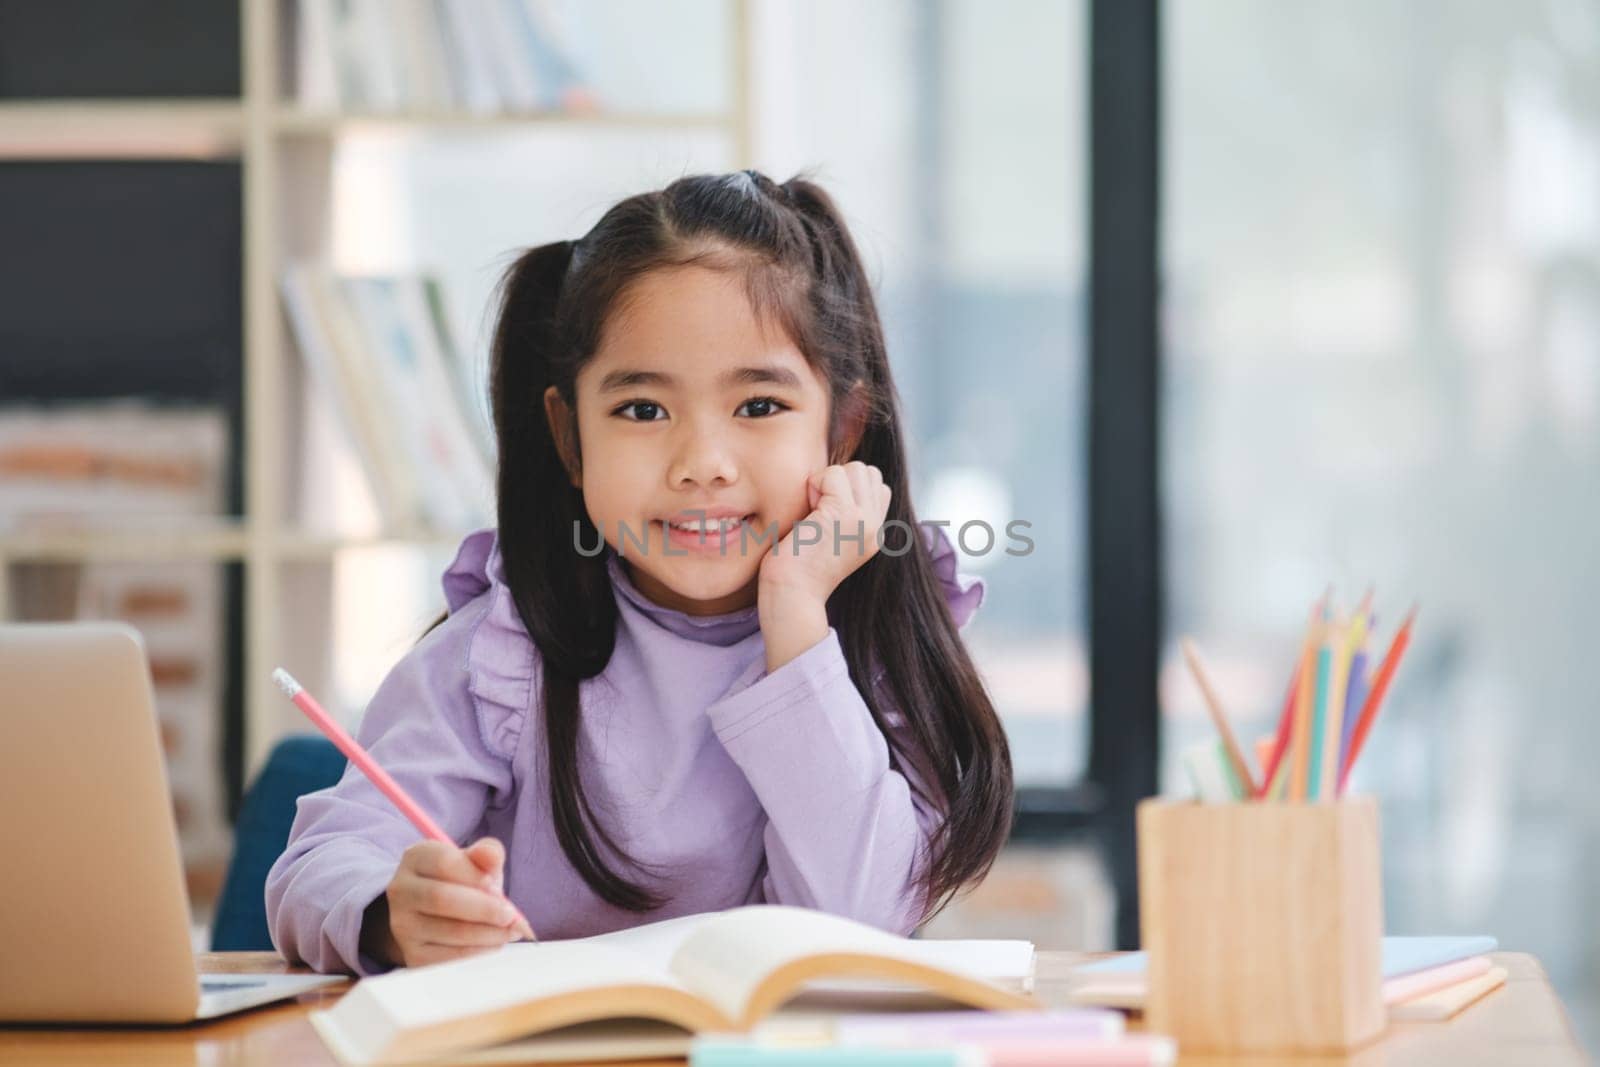 A young girl is sitting at a desk with a laptop and a book. She is smiling and she is enjoying herself